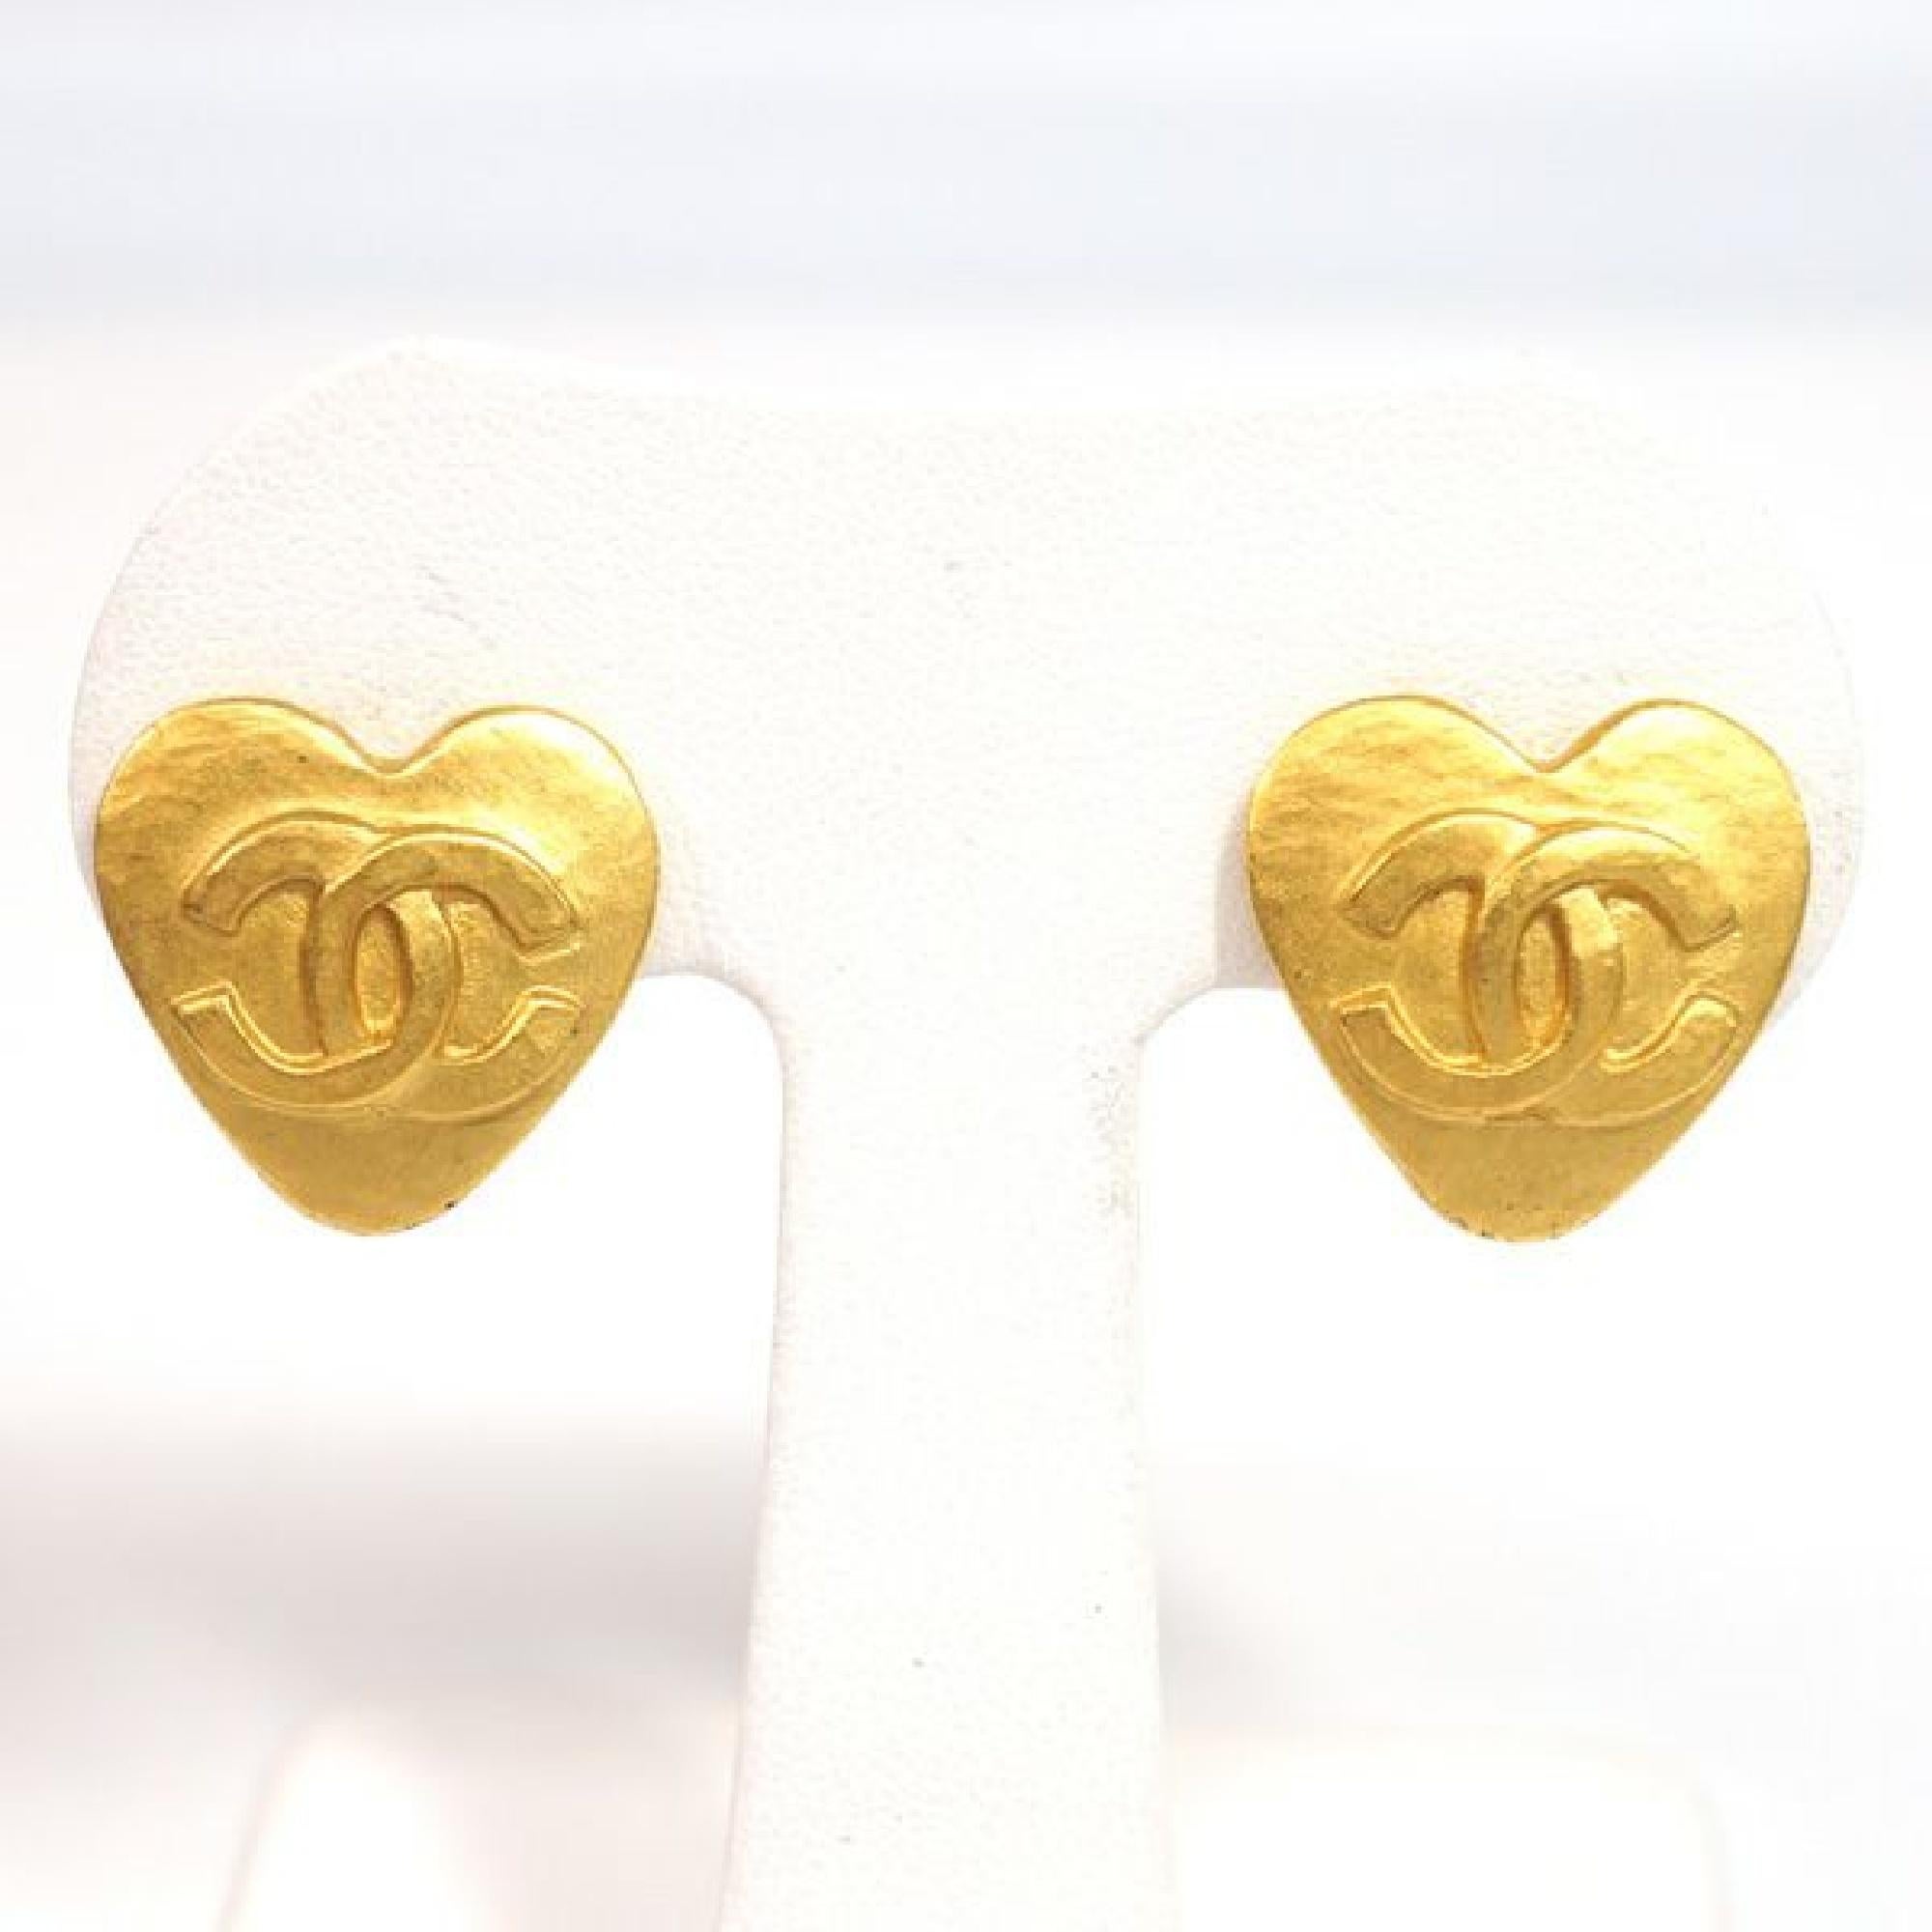 An authentic CHANEL coco mark heart GP Womens earrings gold The outside material is GP. This item is Contemporary. The year of manufacture would be 1986.
Rank
A beauty goods
There is little bit signs of wear, but overall a beautiful used product

A